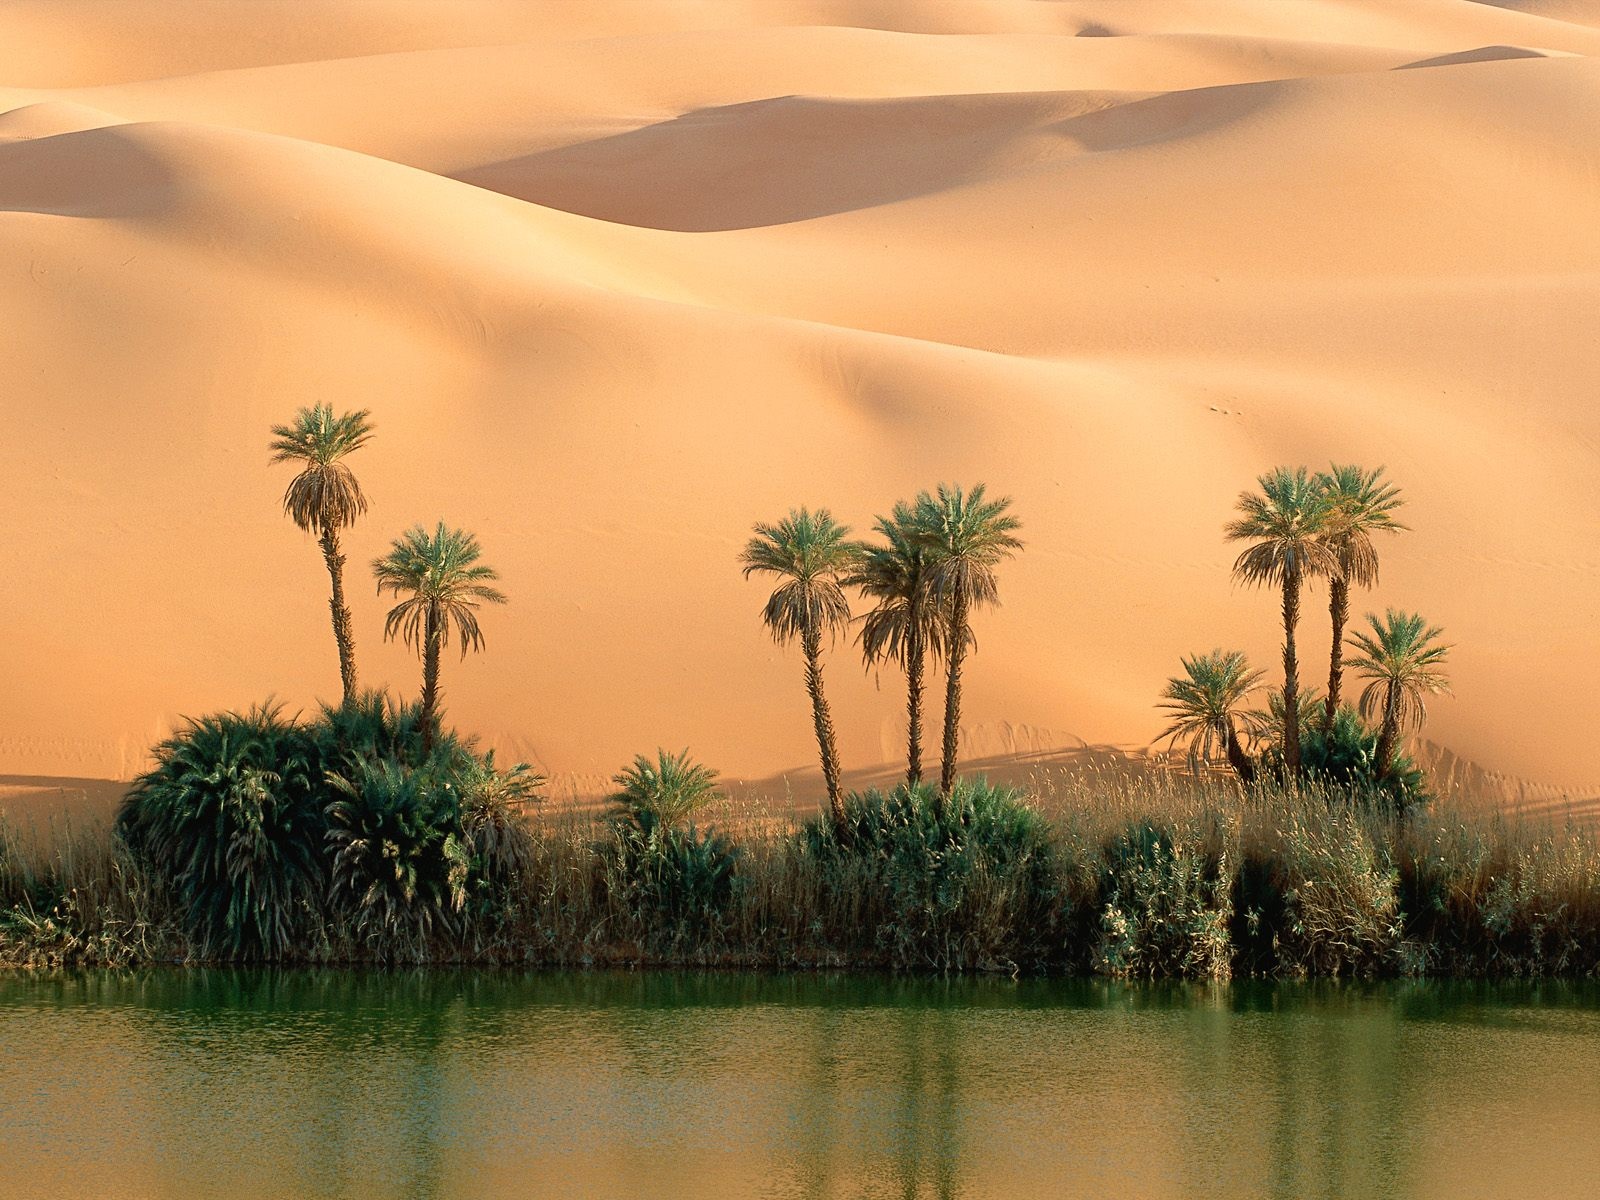 Desert oasis wallpapers and images   wallpapers pictures photos